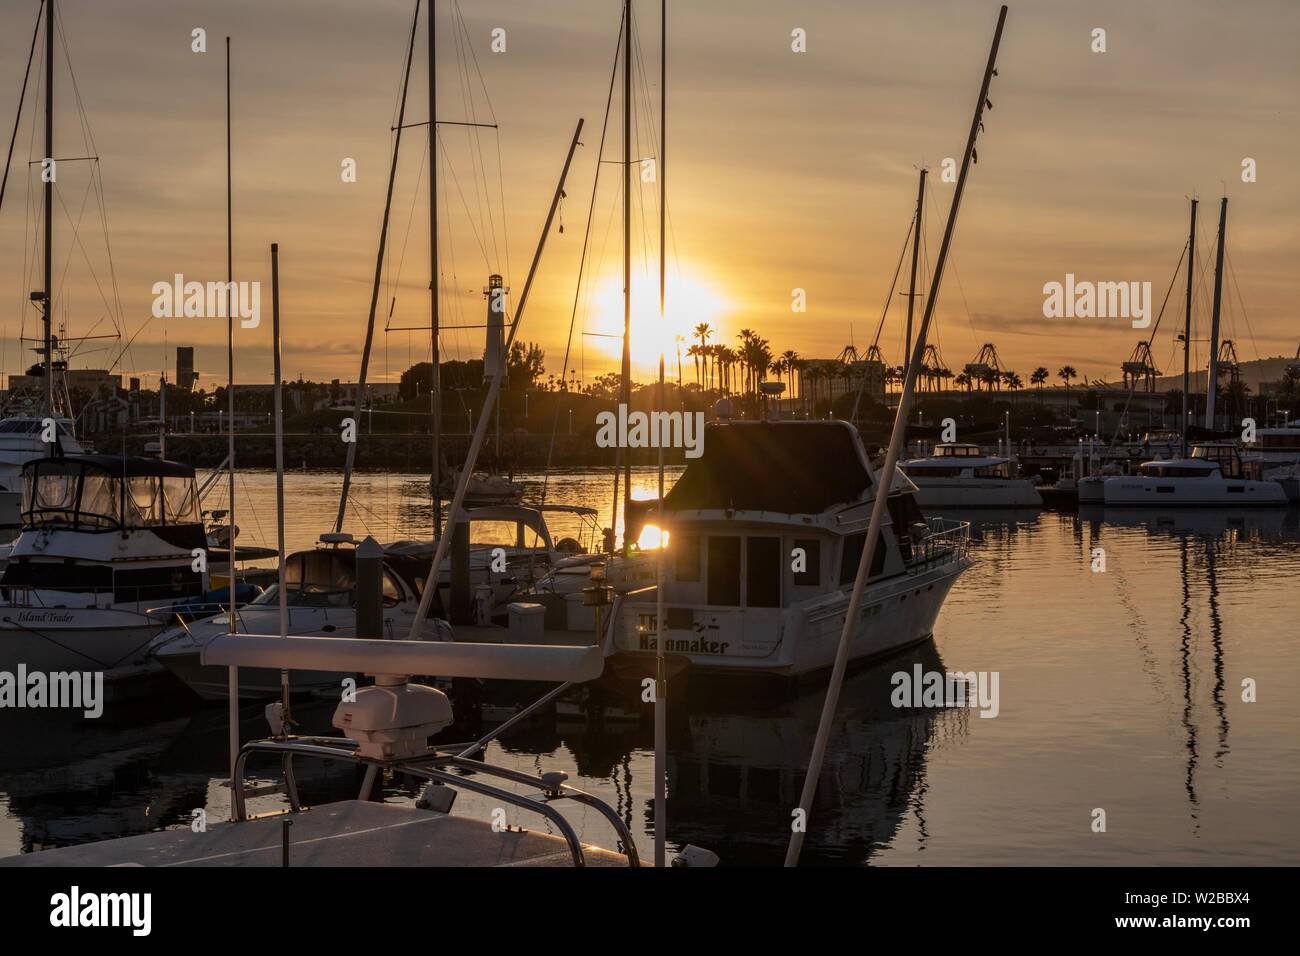 Boats moored in a harbor during sunset Stock Photo